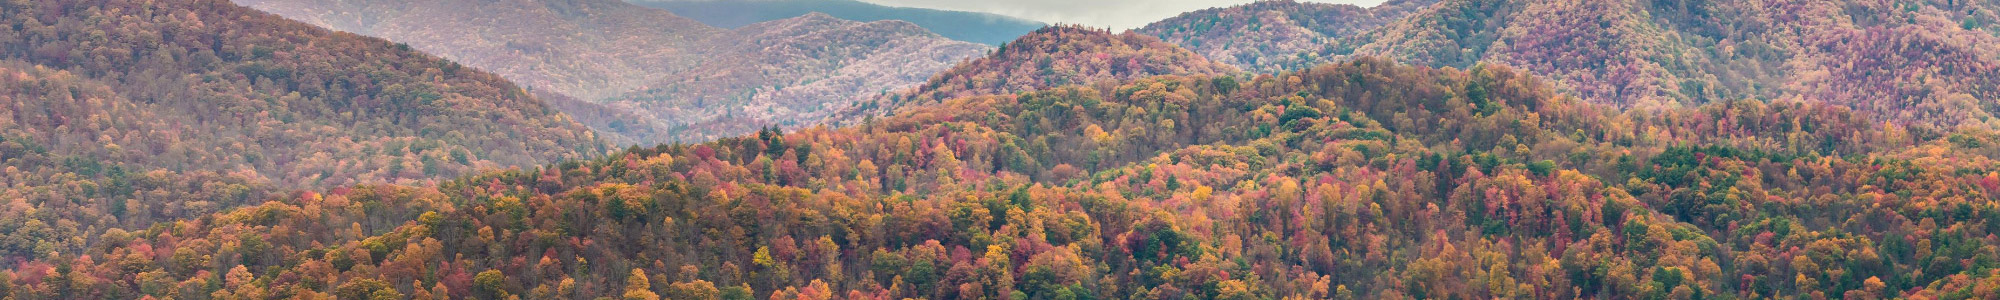 Tennessee mountains in the fall with the trees changing color